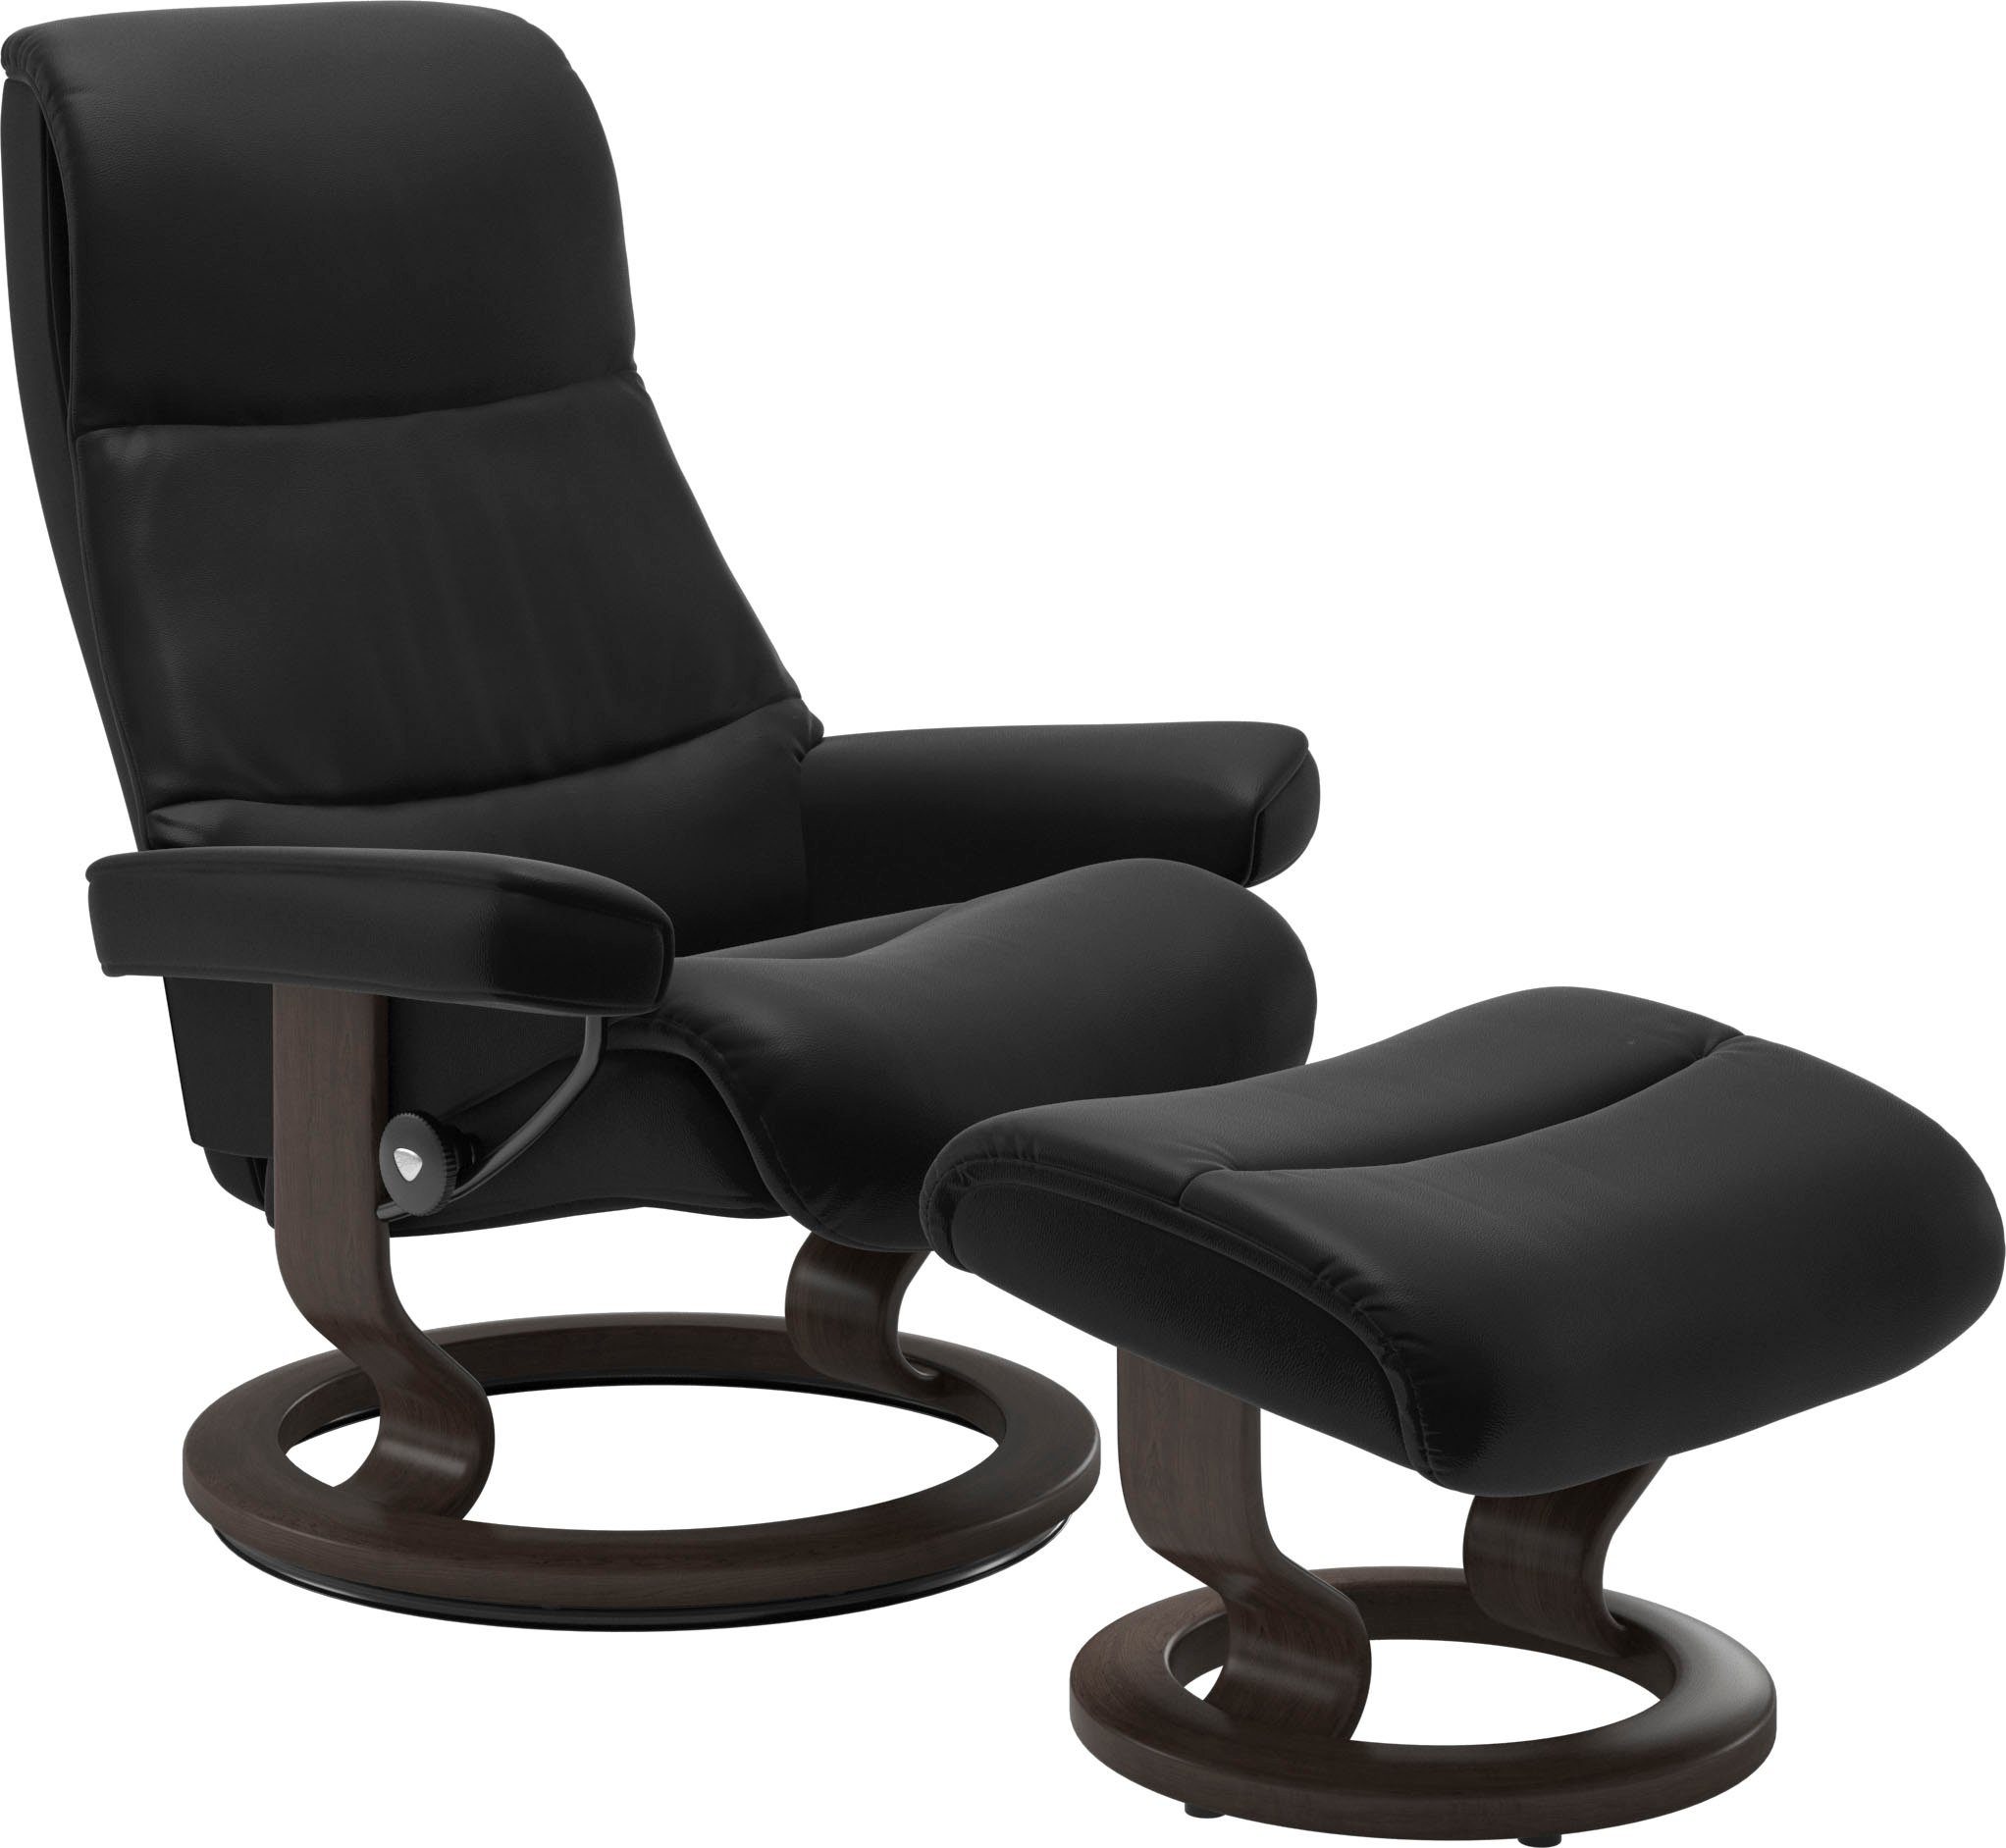 Classic Relaxsessel mit Größe M,Gestell View, Wenge Stressless® Base,